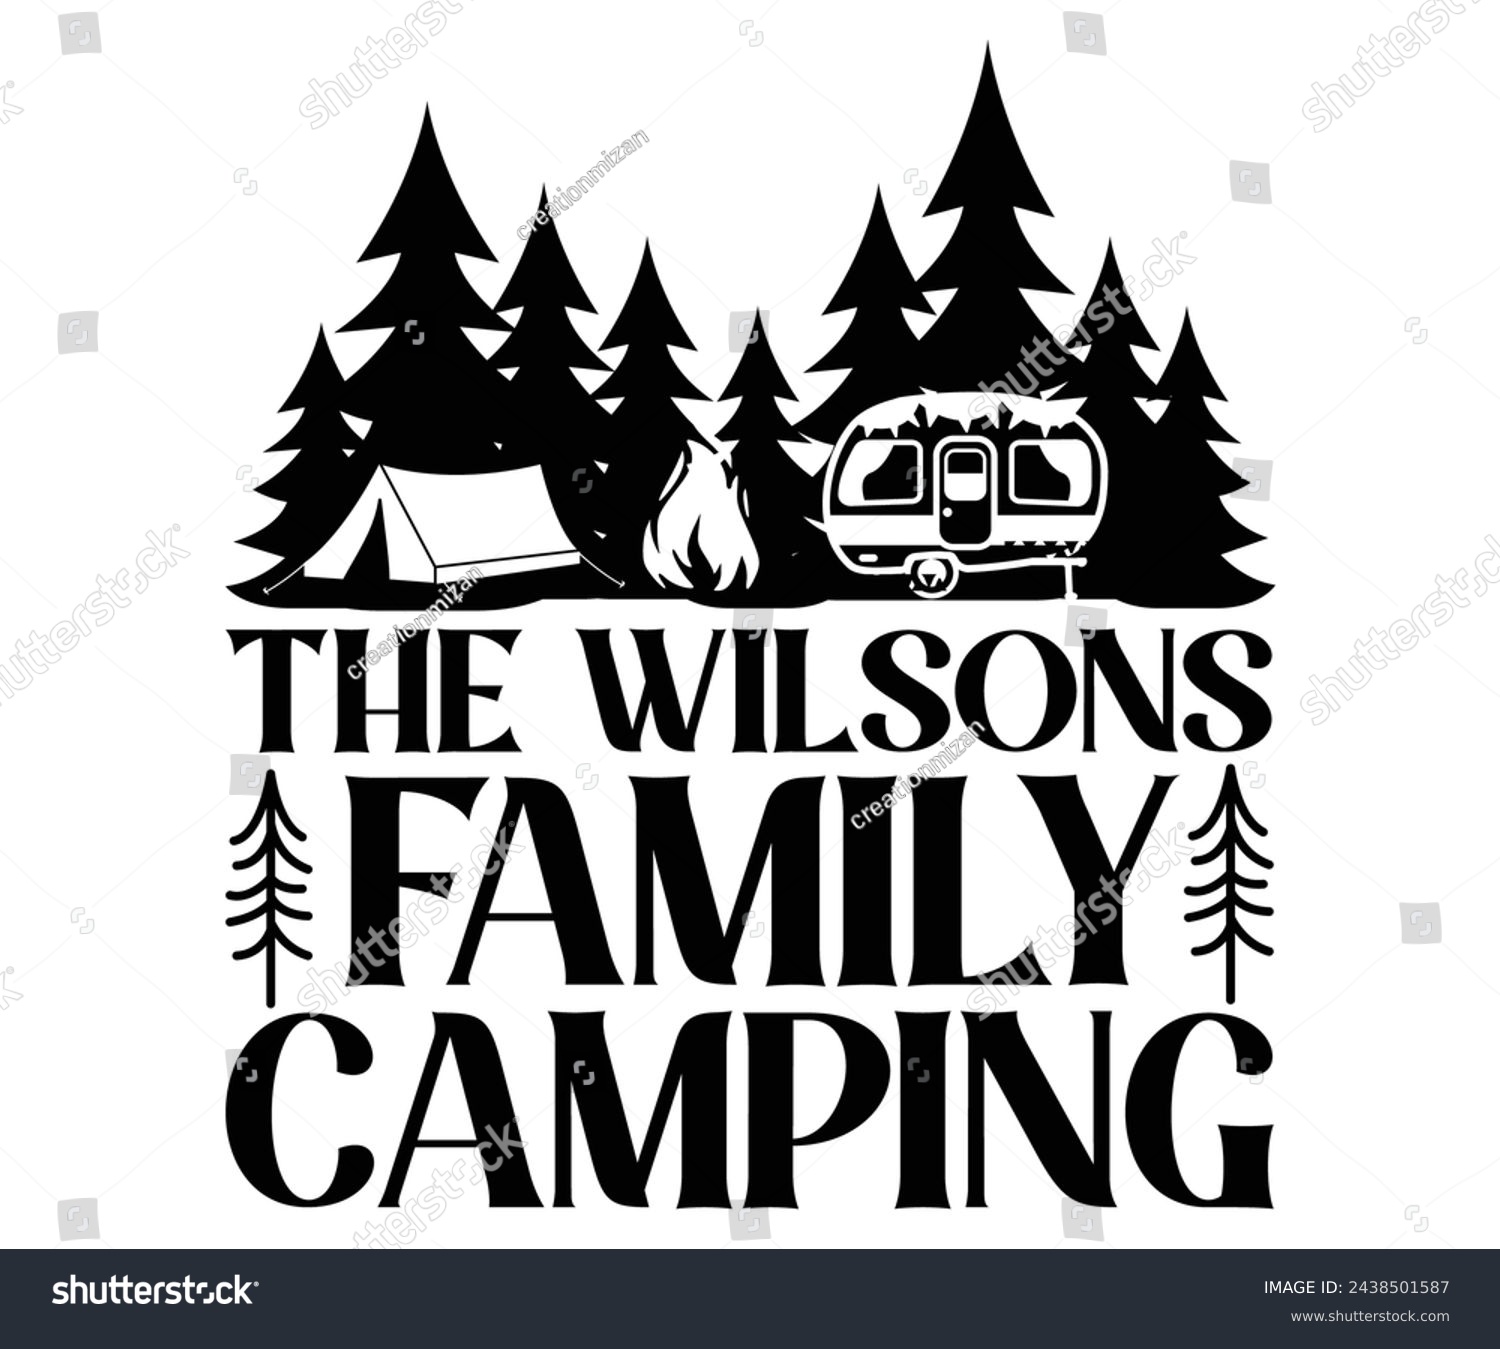 SVG of The Wilsons Family Camping Svg,Camping Svg,Hiking,Funny Camping,Adventure,Summer Camp,Happy Camper,Camp Life,Camp Saying,Camping Shirt svg